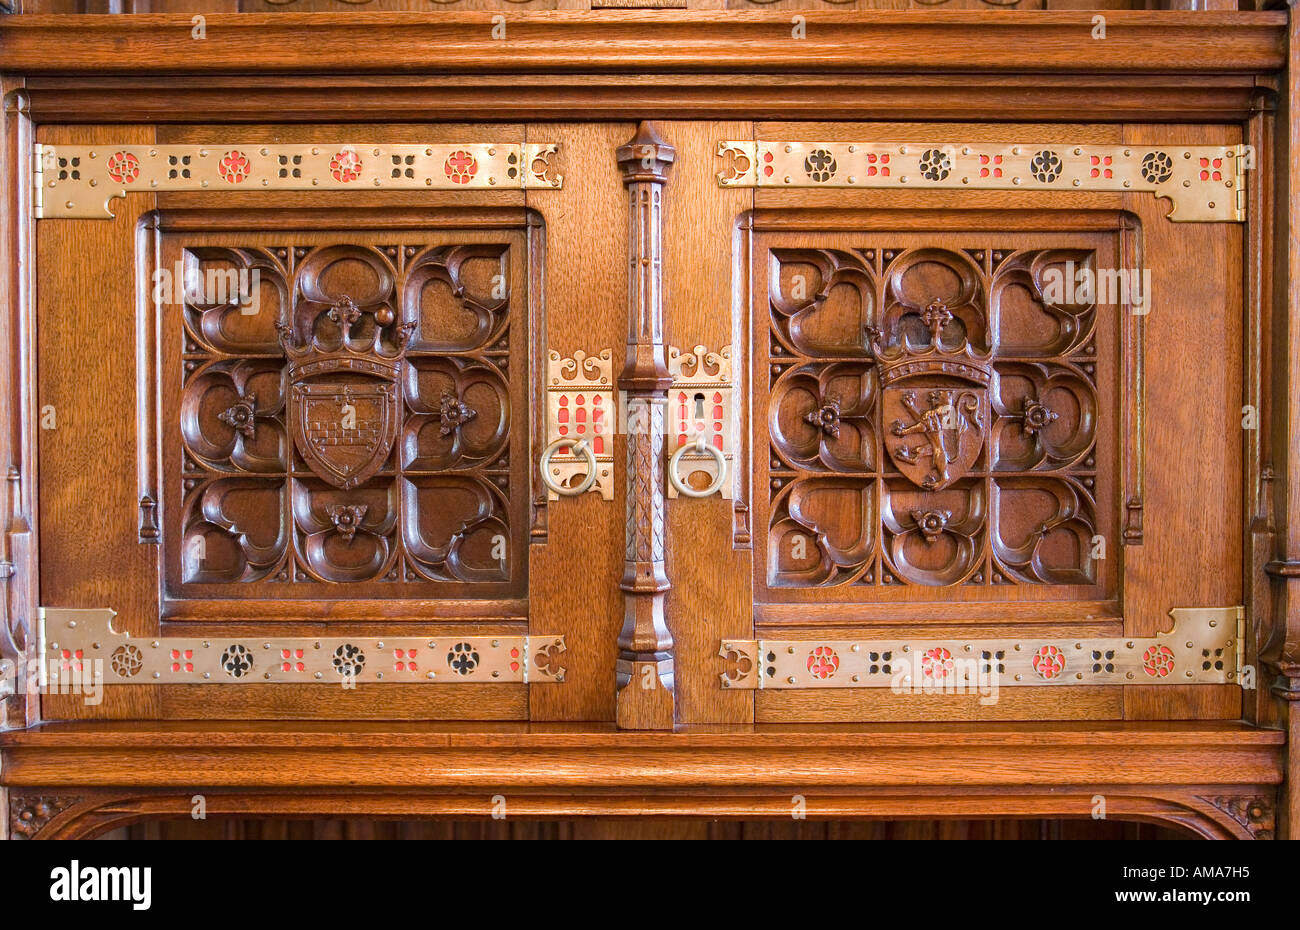 Wales Cardiff Castle Banqueting Hall sideboard carved wooden door detail Stock Photo